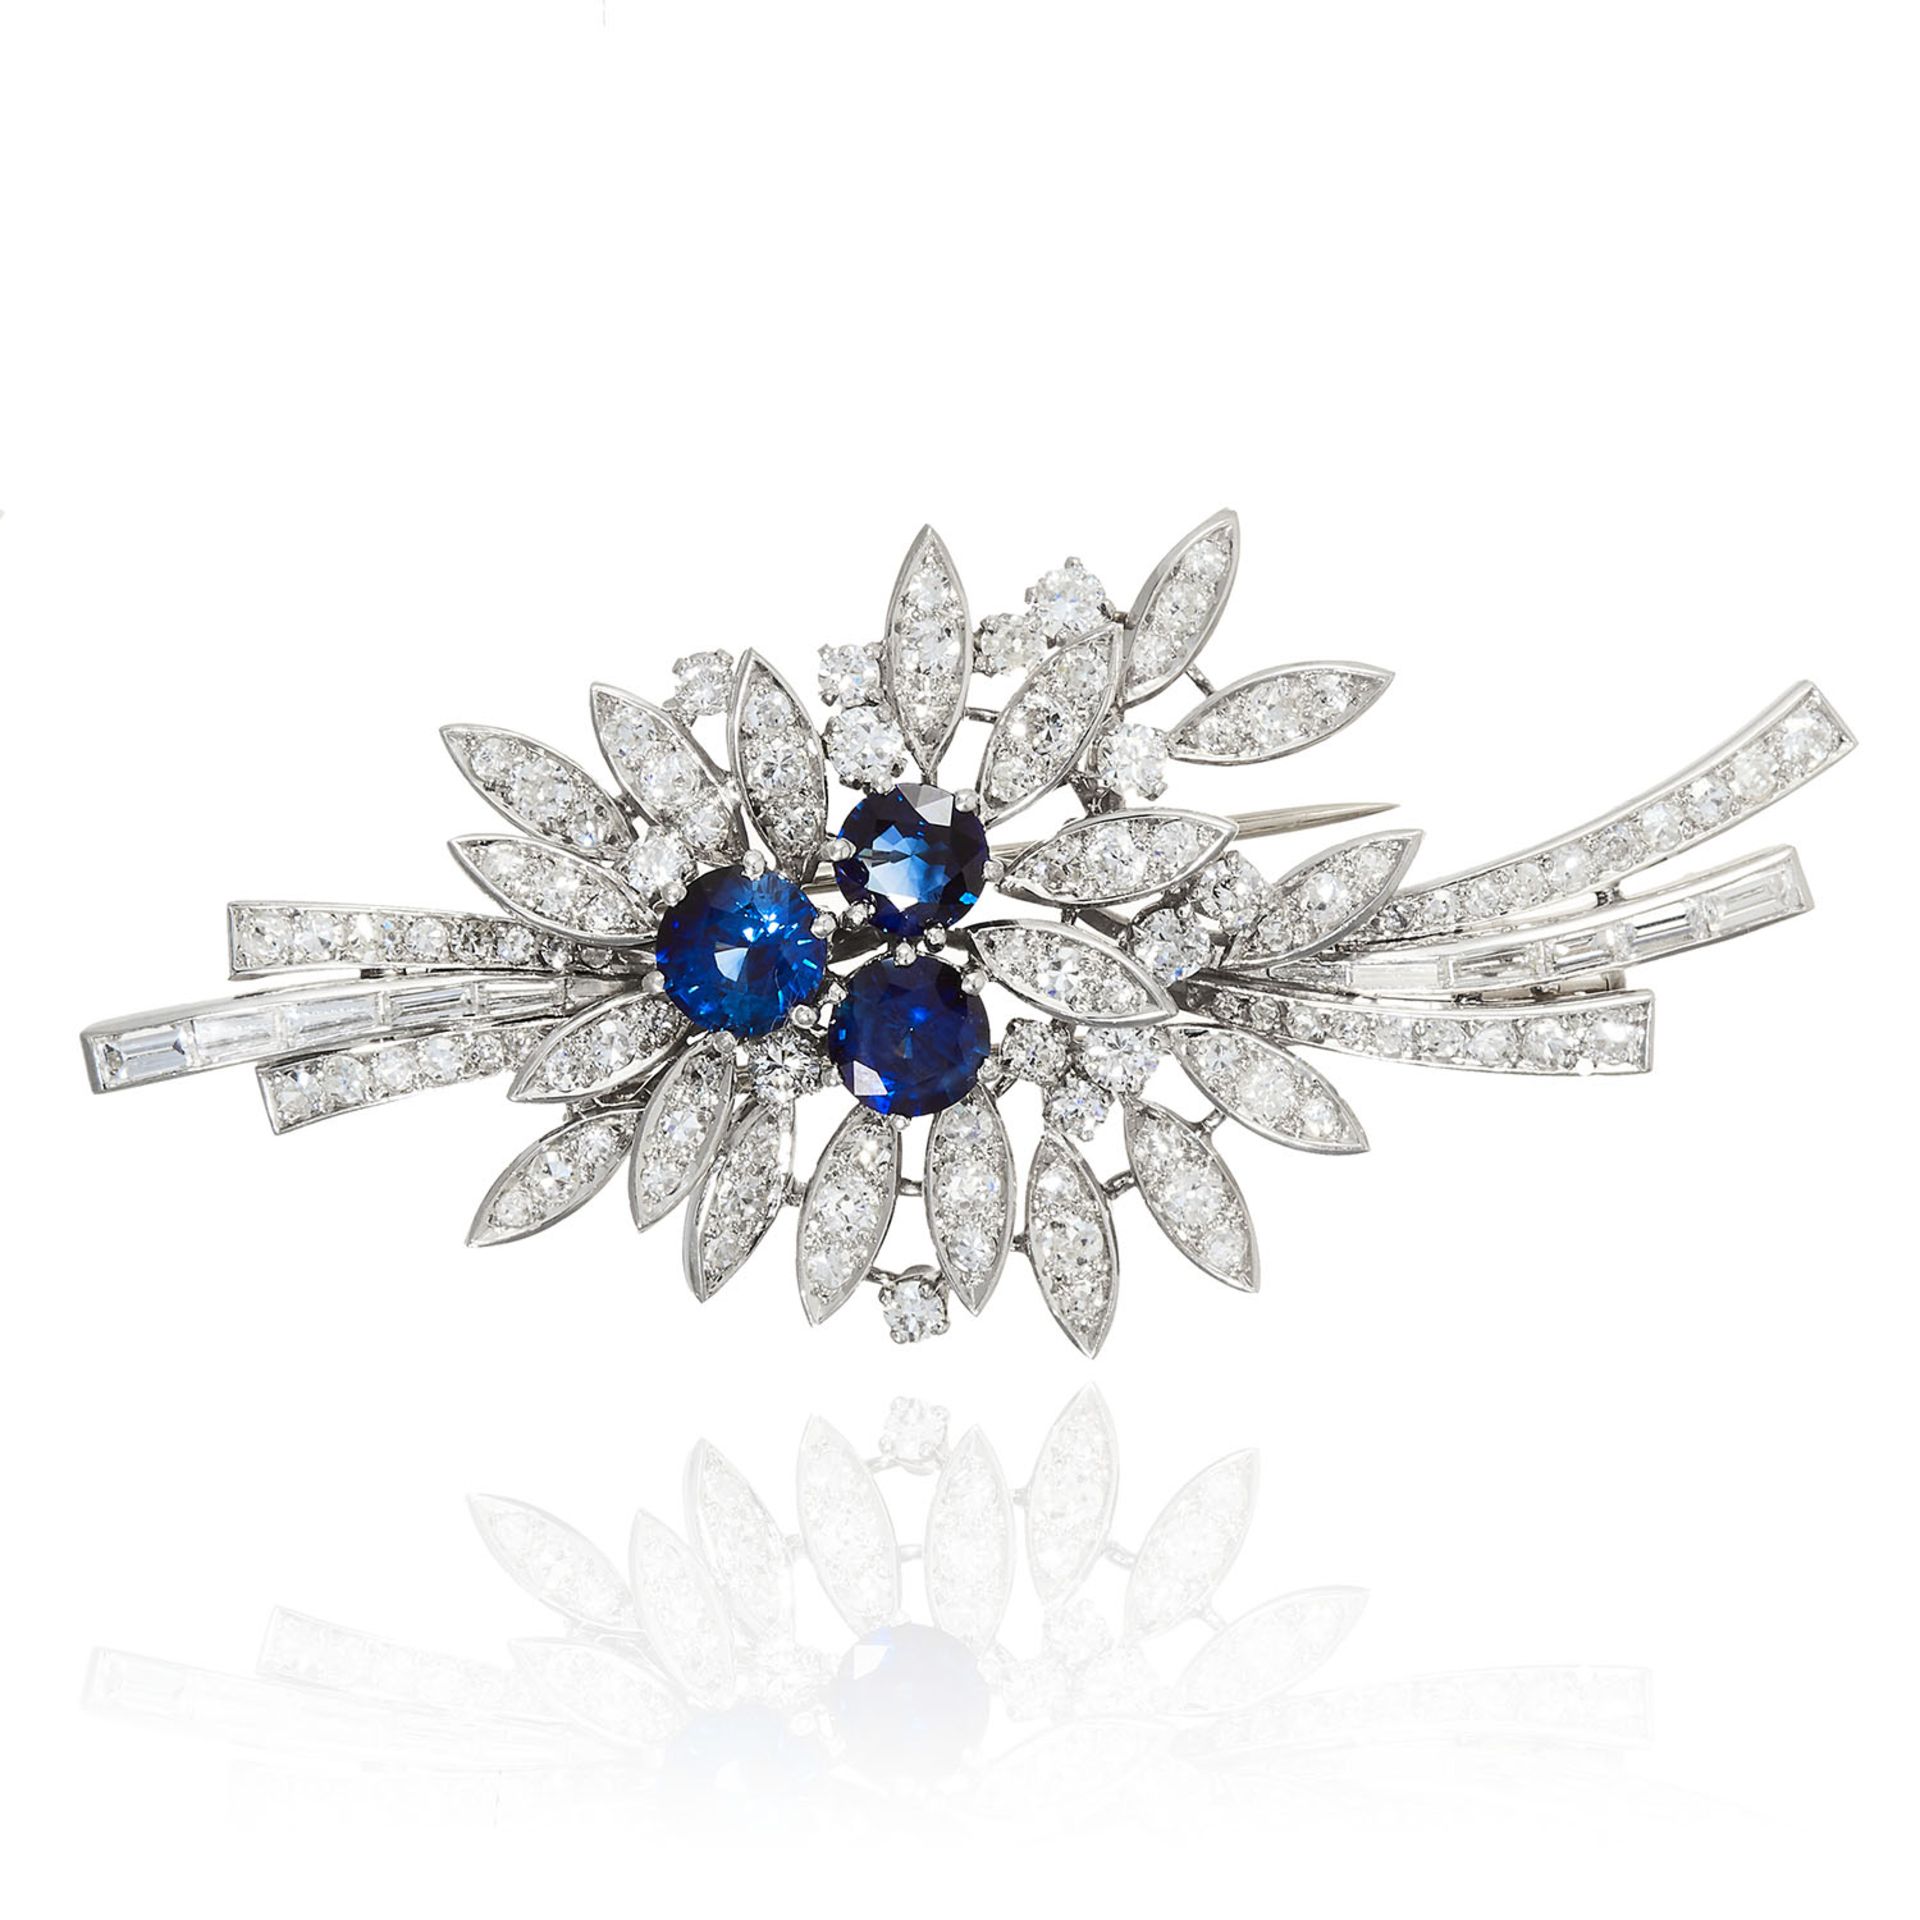 A DIAMOND AND SAPPHIRE BROOCH in white gold or platinum, the body formed of leaf and ribbon